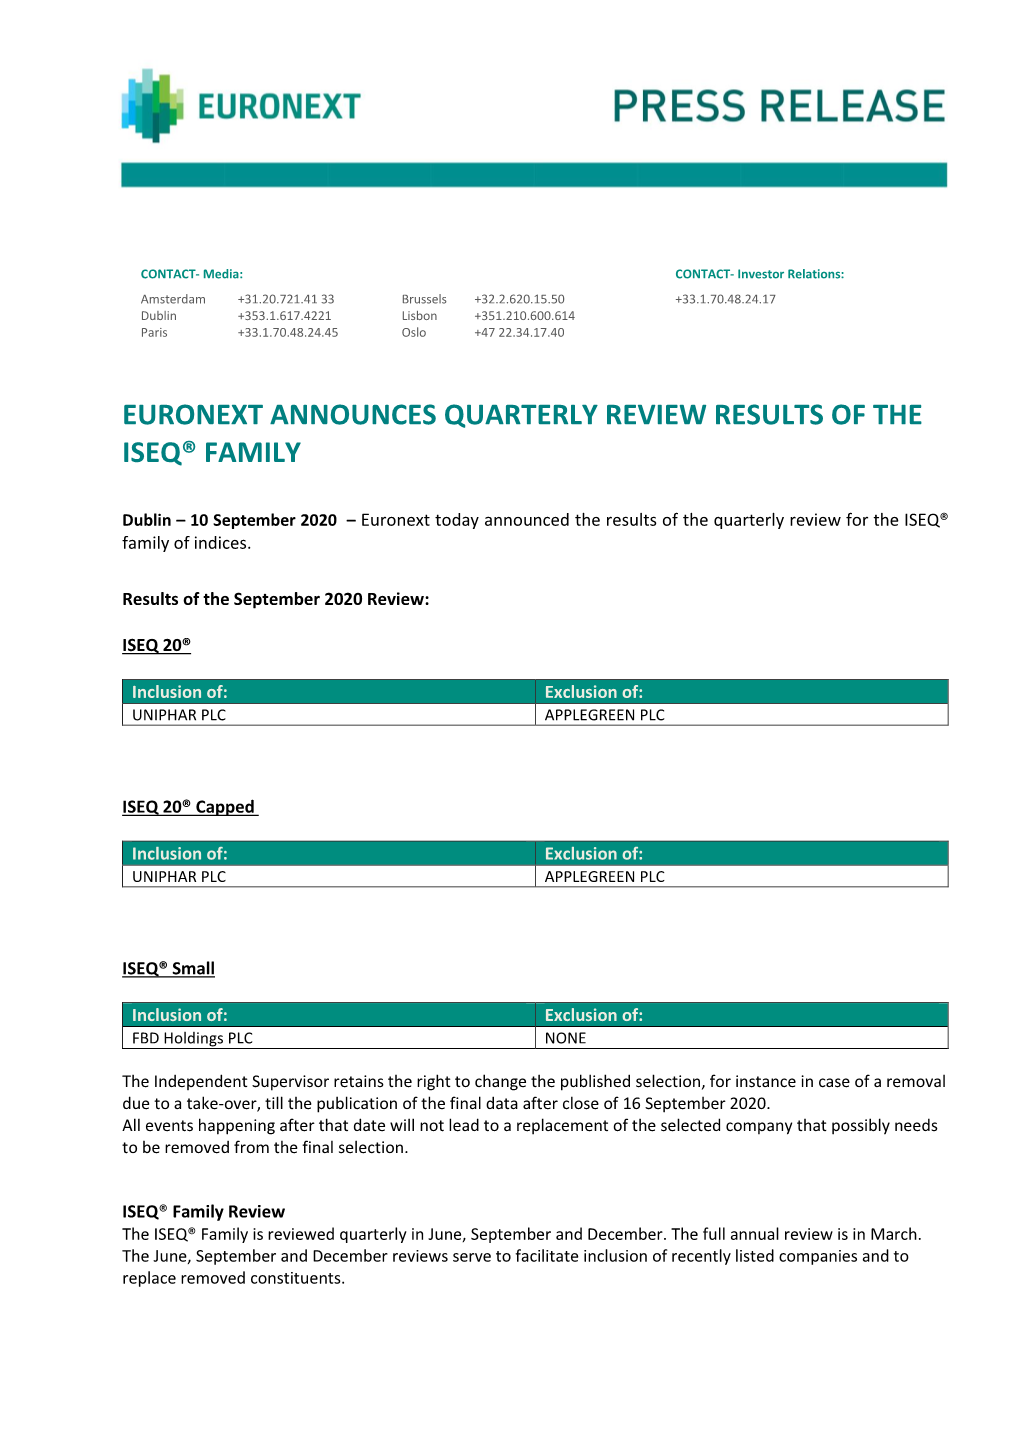 Euronext Announces Quarterly Review Results of the Iseq® Family